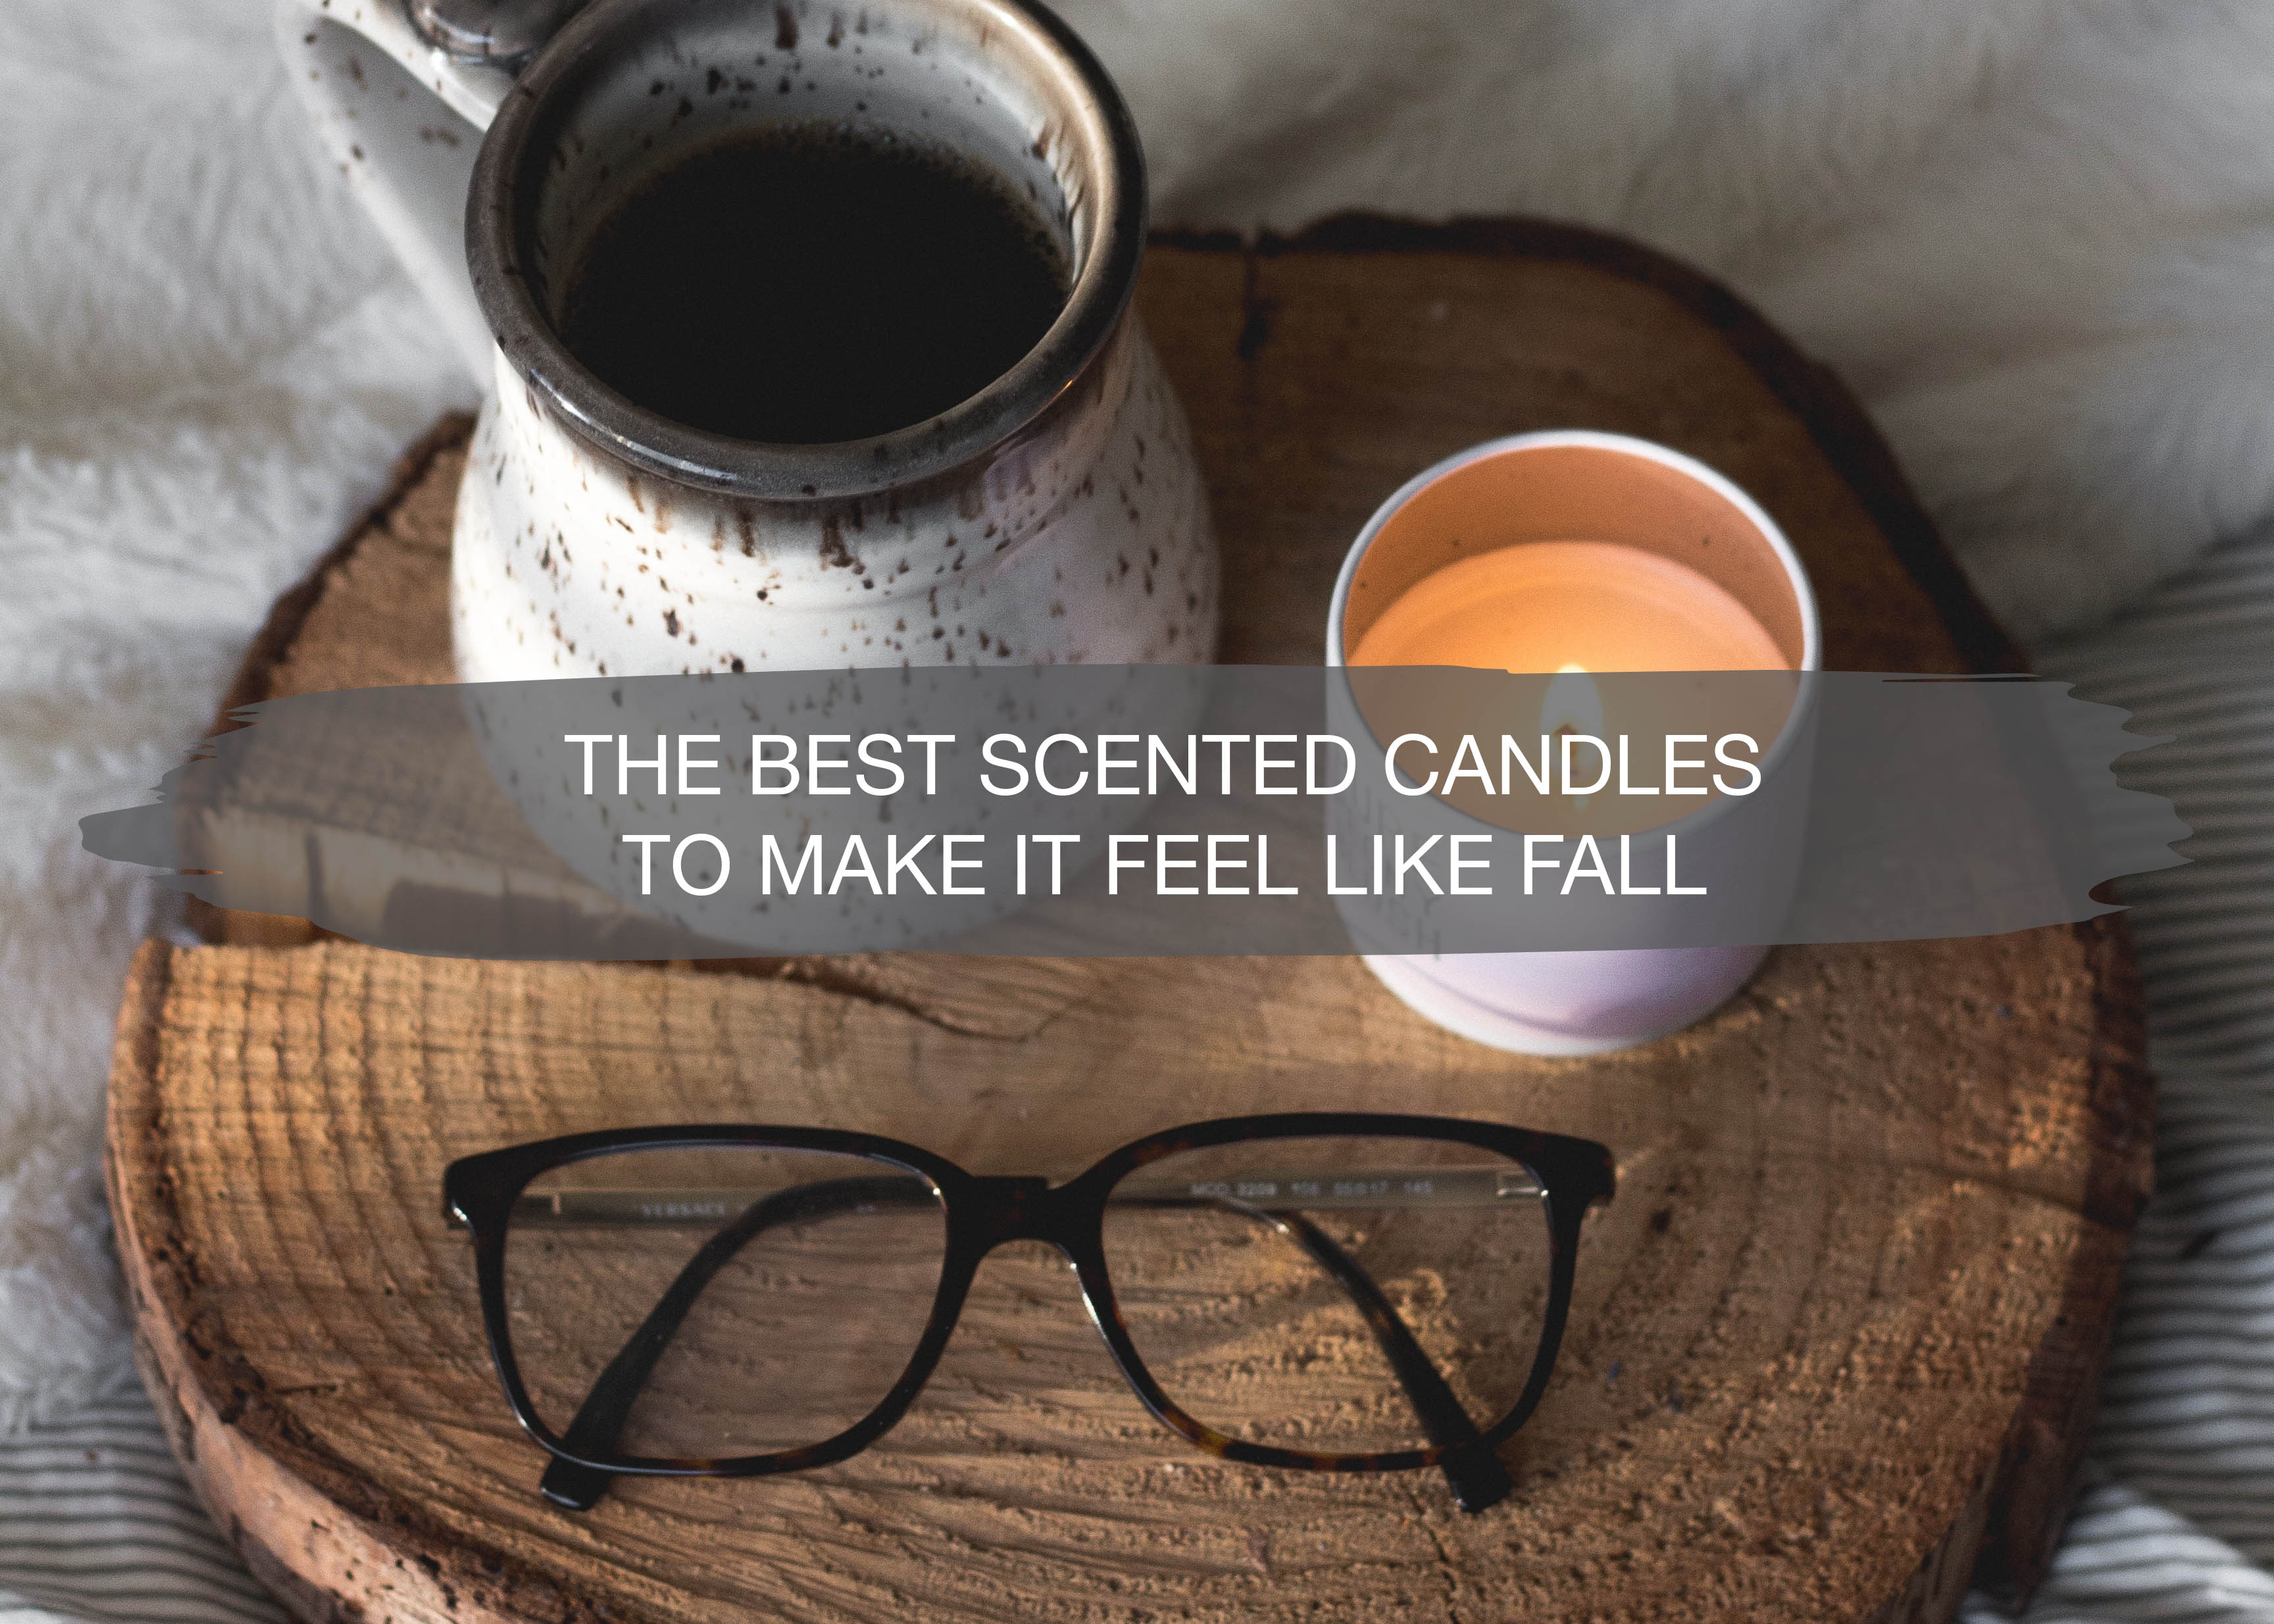 The Best Scented Candles to Make it Feel Like Fall 1